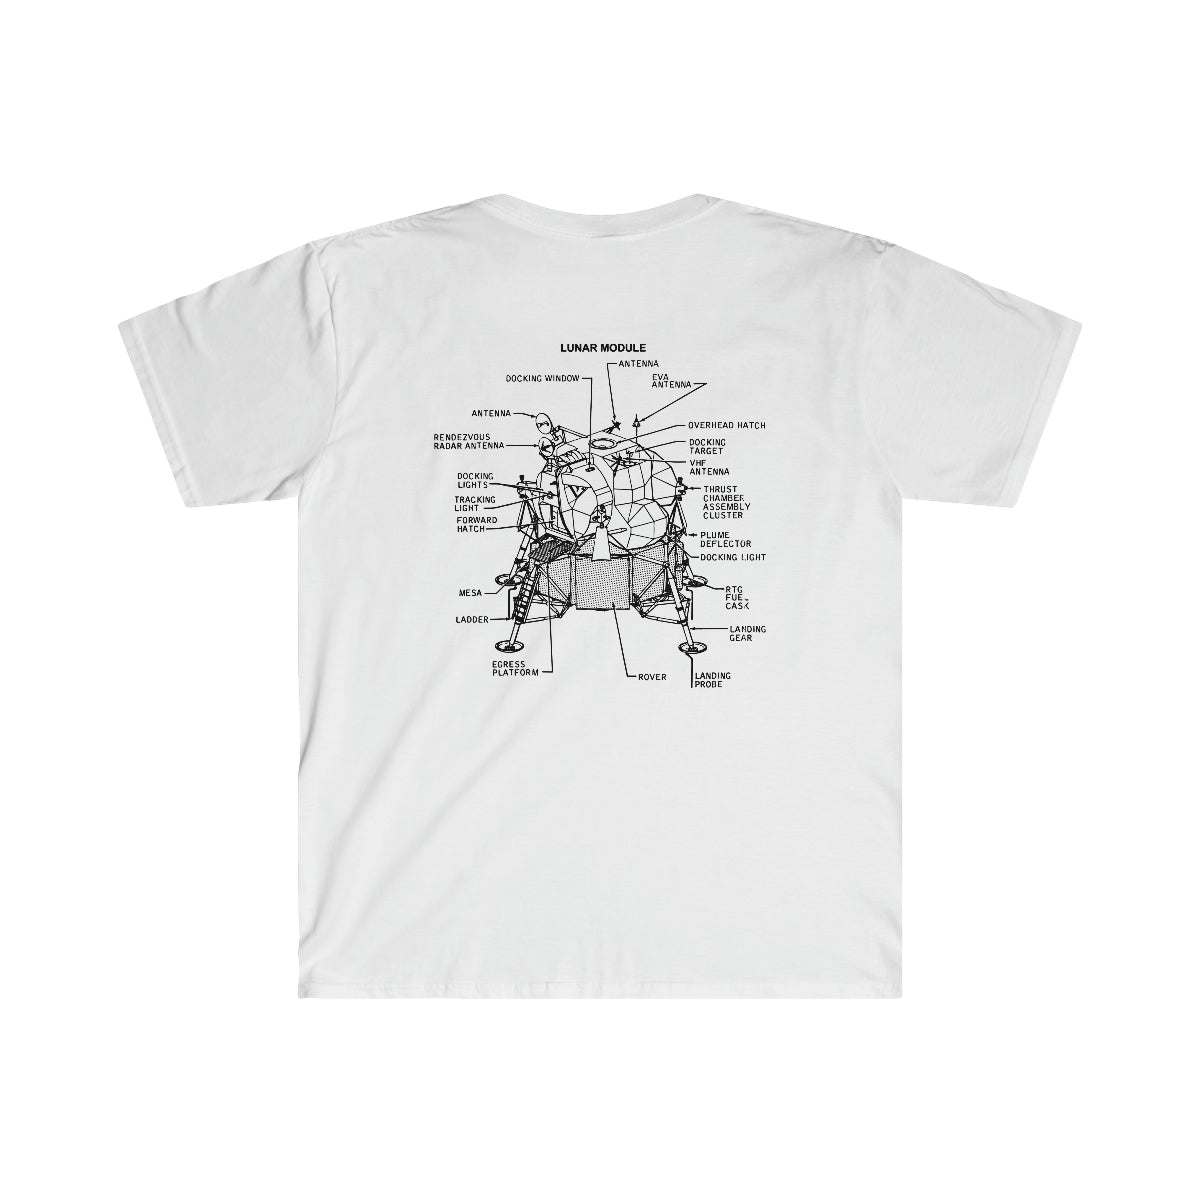 A Moon Landing T-Shirt featuring a diagram of a spacecraft, paying homage to the moon landing and astronauts.